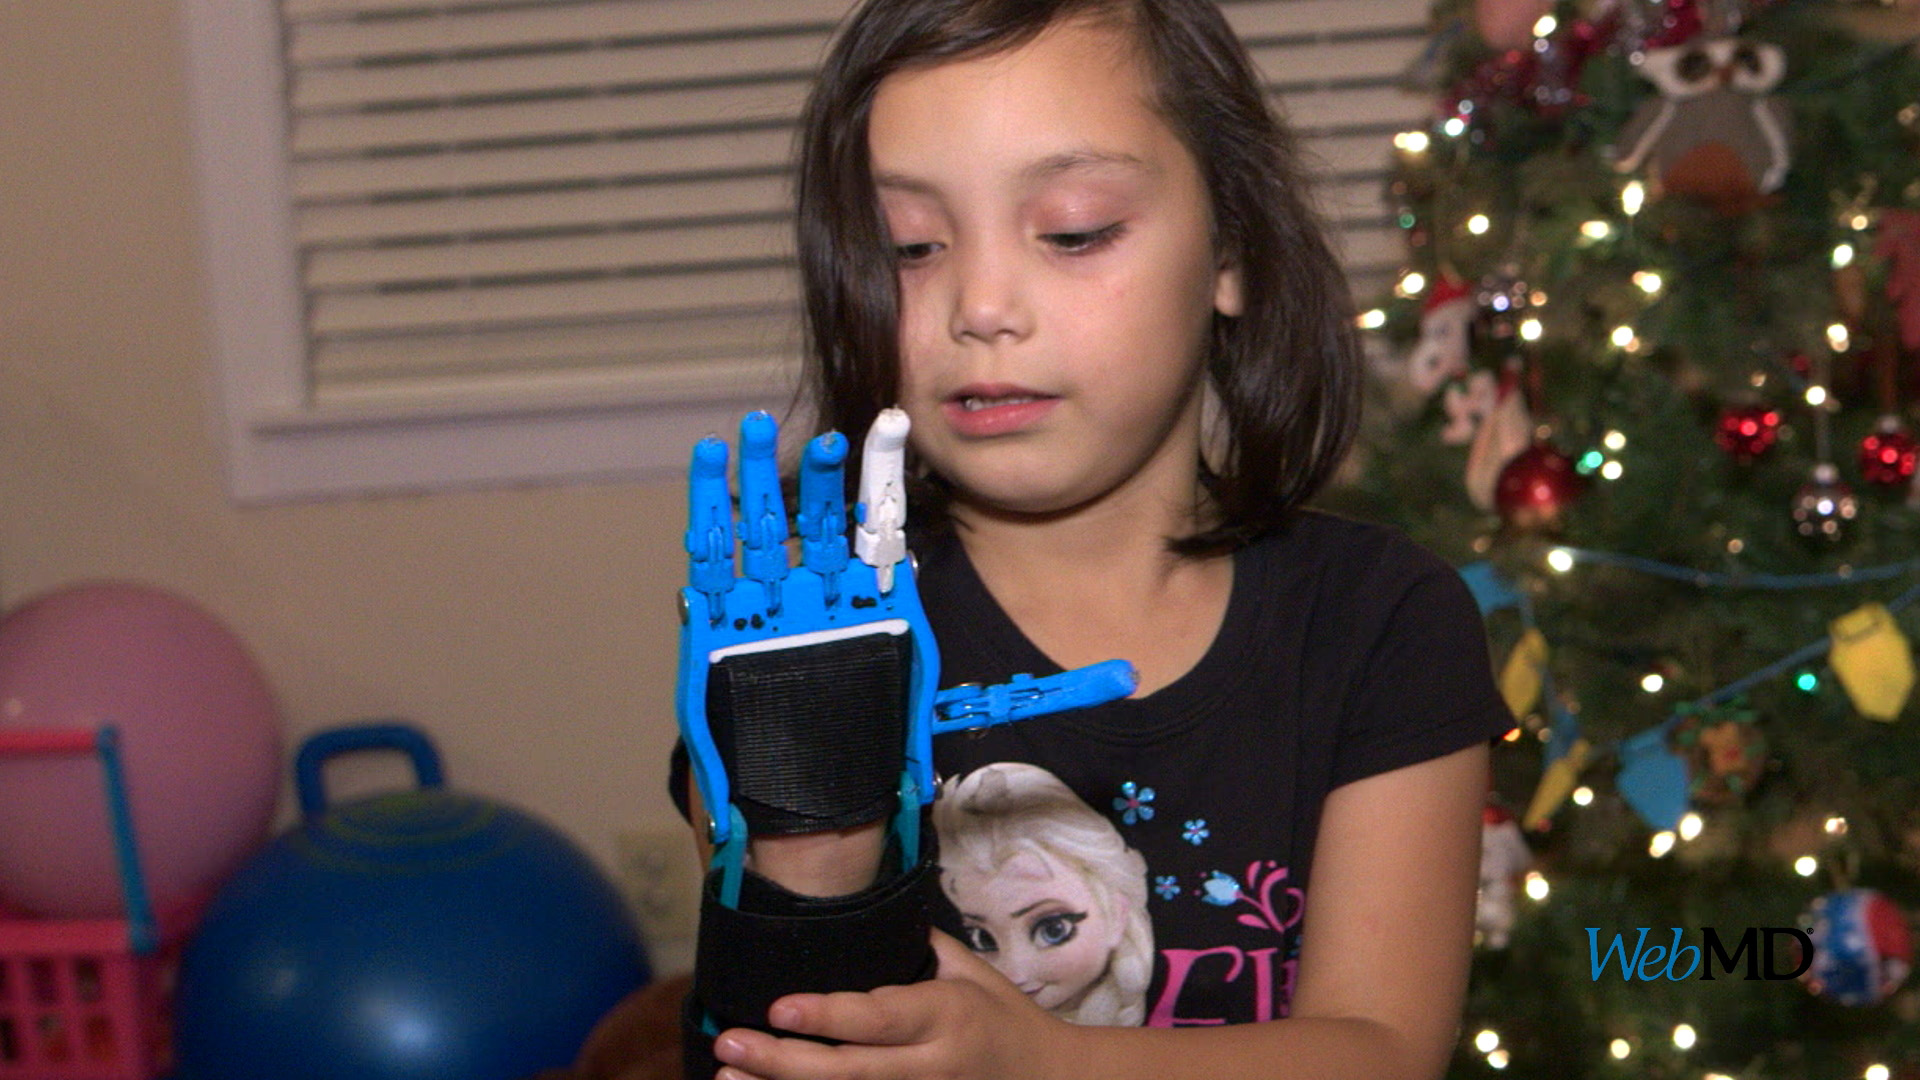 With 3-D Printing, Ariah receives prosthetic hand